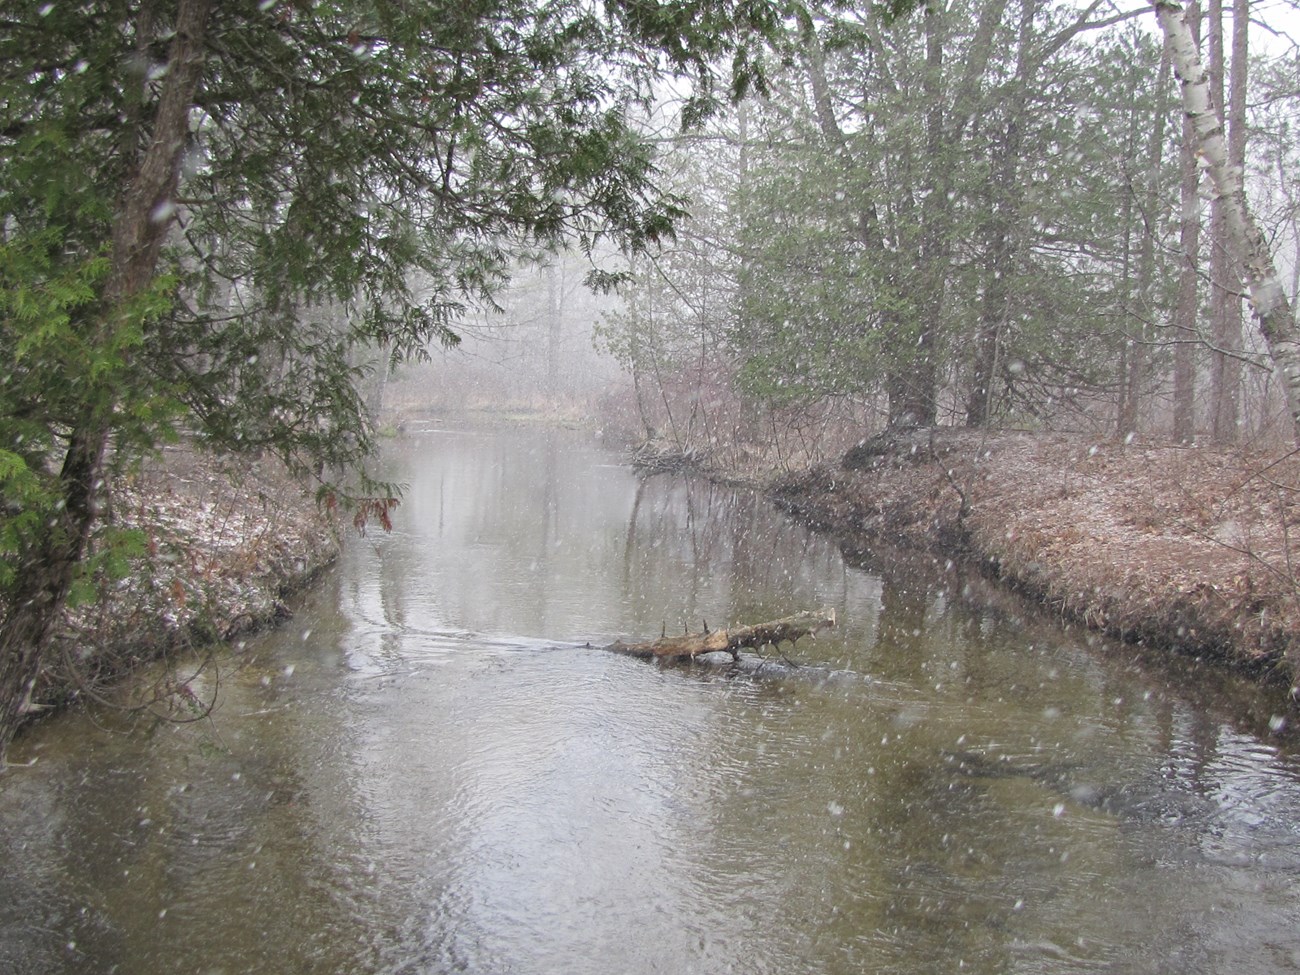 Snow falls on a river with hemlock trees on its banks.